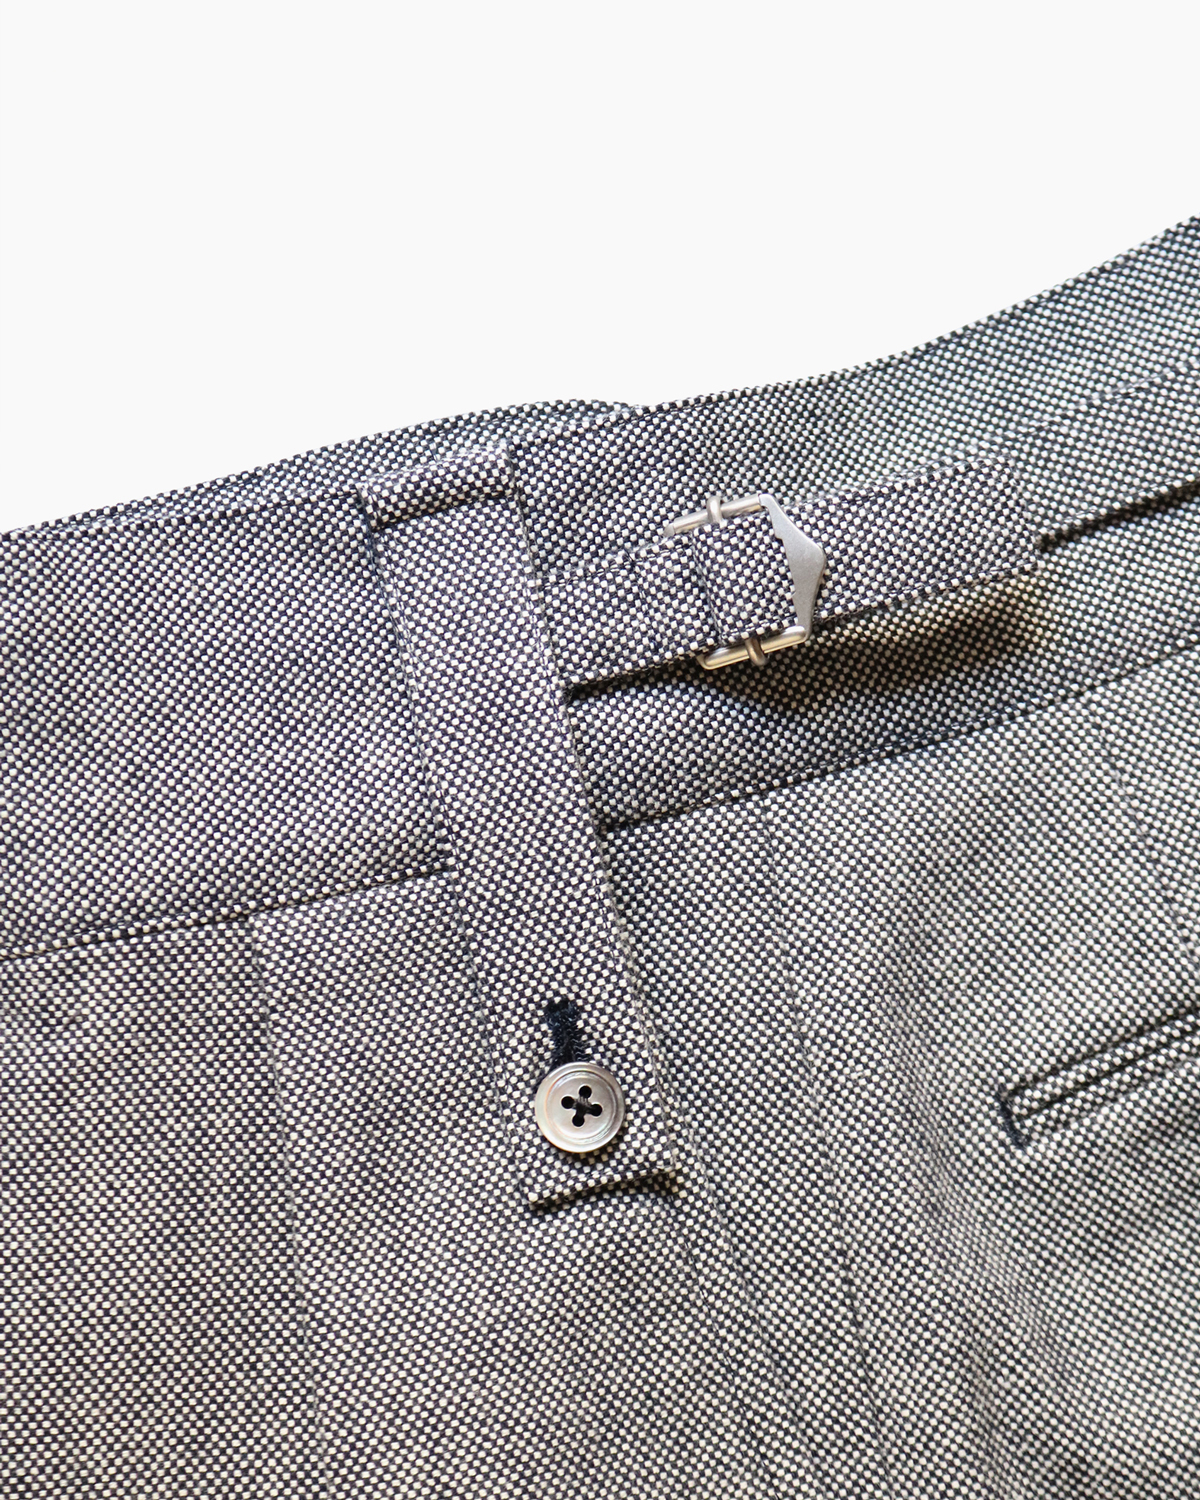 NEAT｜AWC WOOL COTTON OXFORD｜BELTLESS - Navy｜PRODUCT｜Continuer 